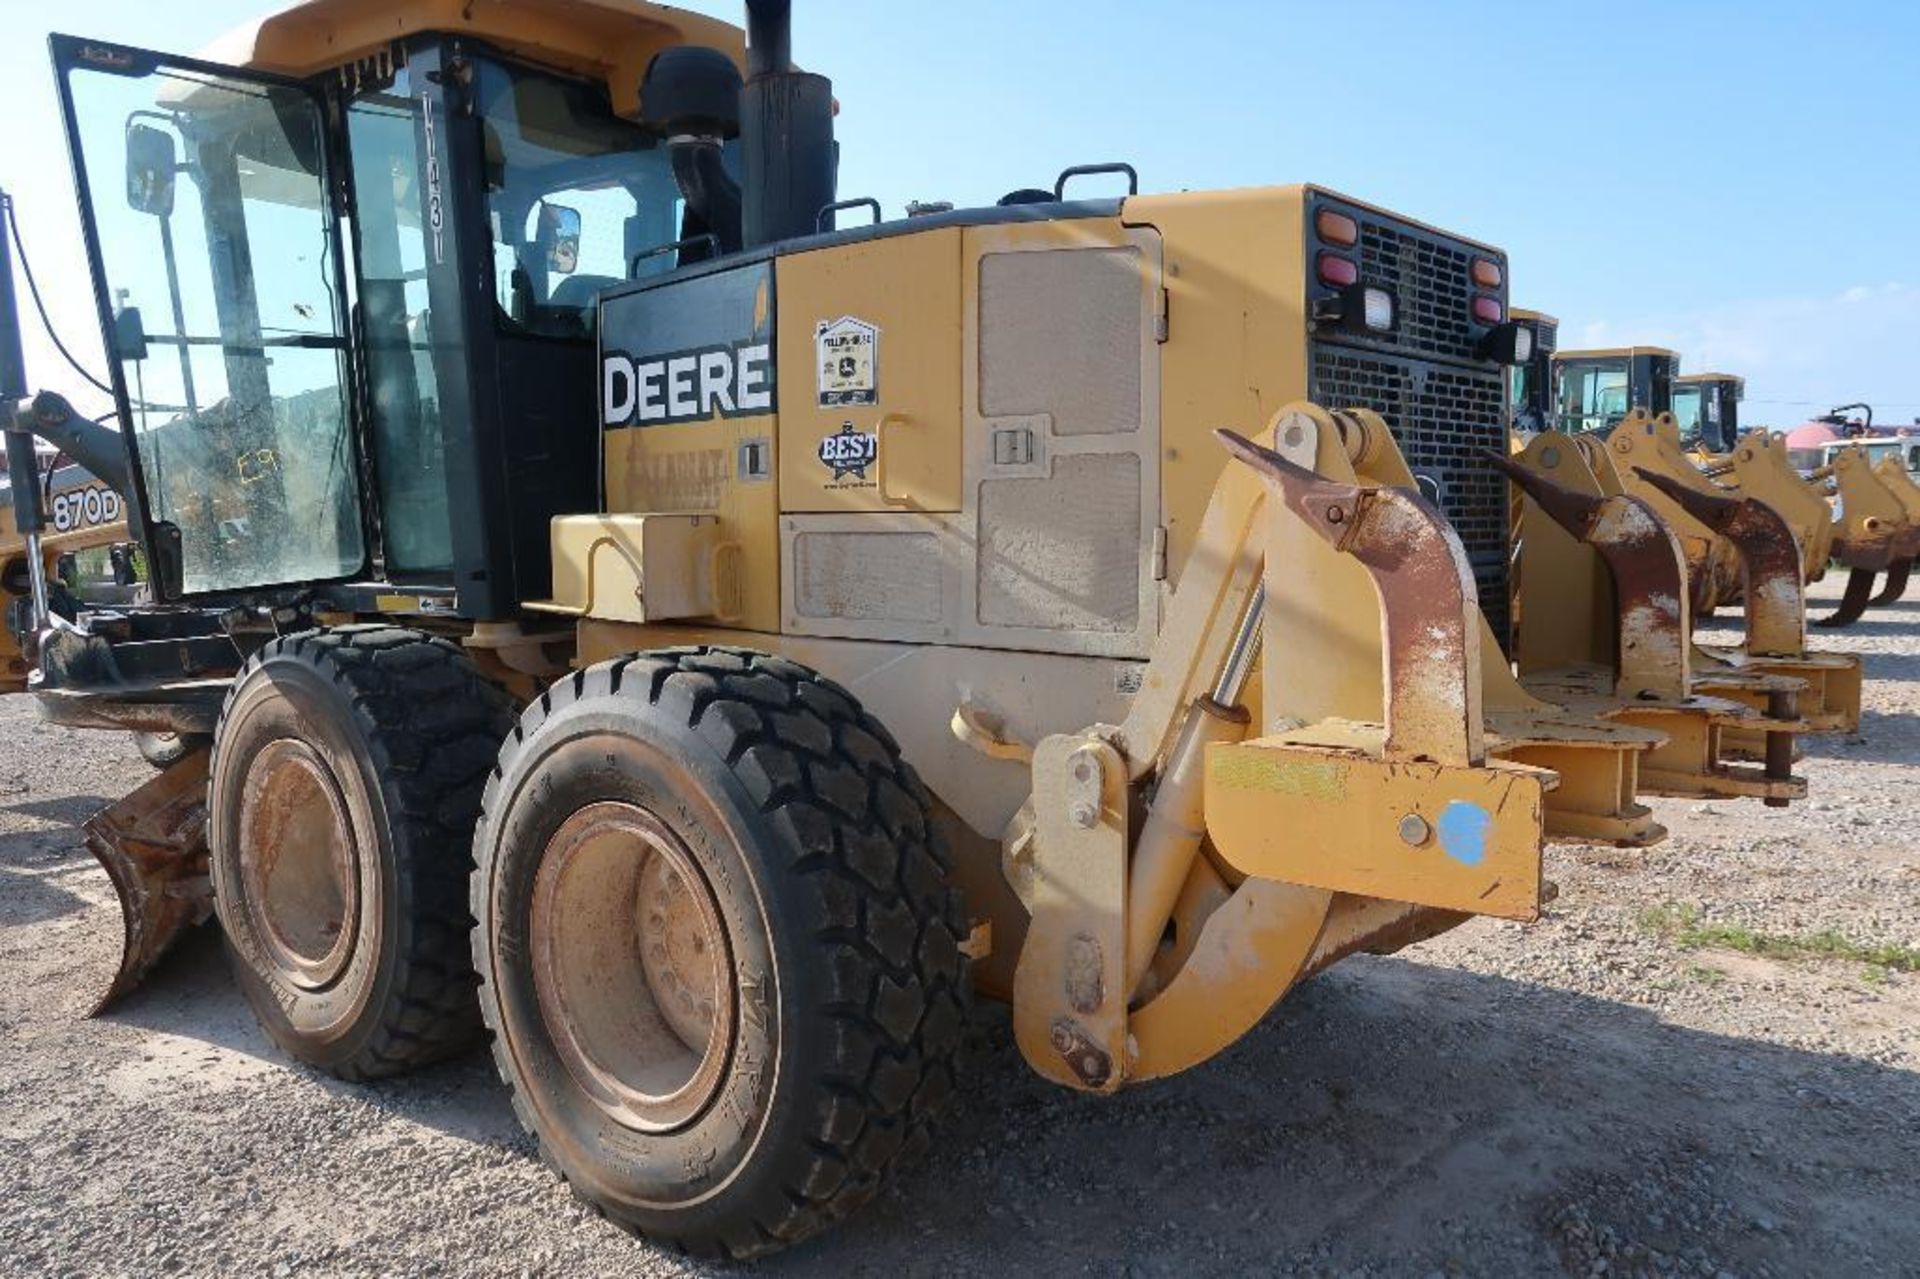 2007 John Deere Motor Grader Model 870D, S/N DW870DX611431, with Ripper (10,340 hours indicated) - Image 7 of 8